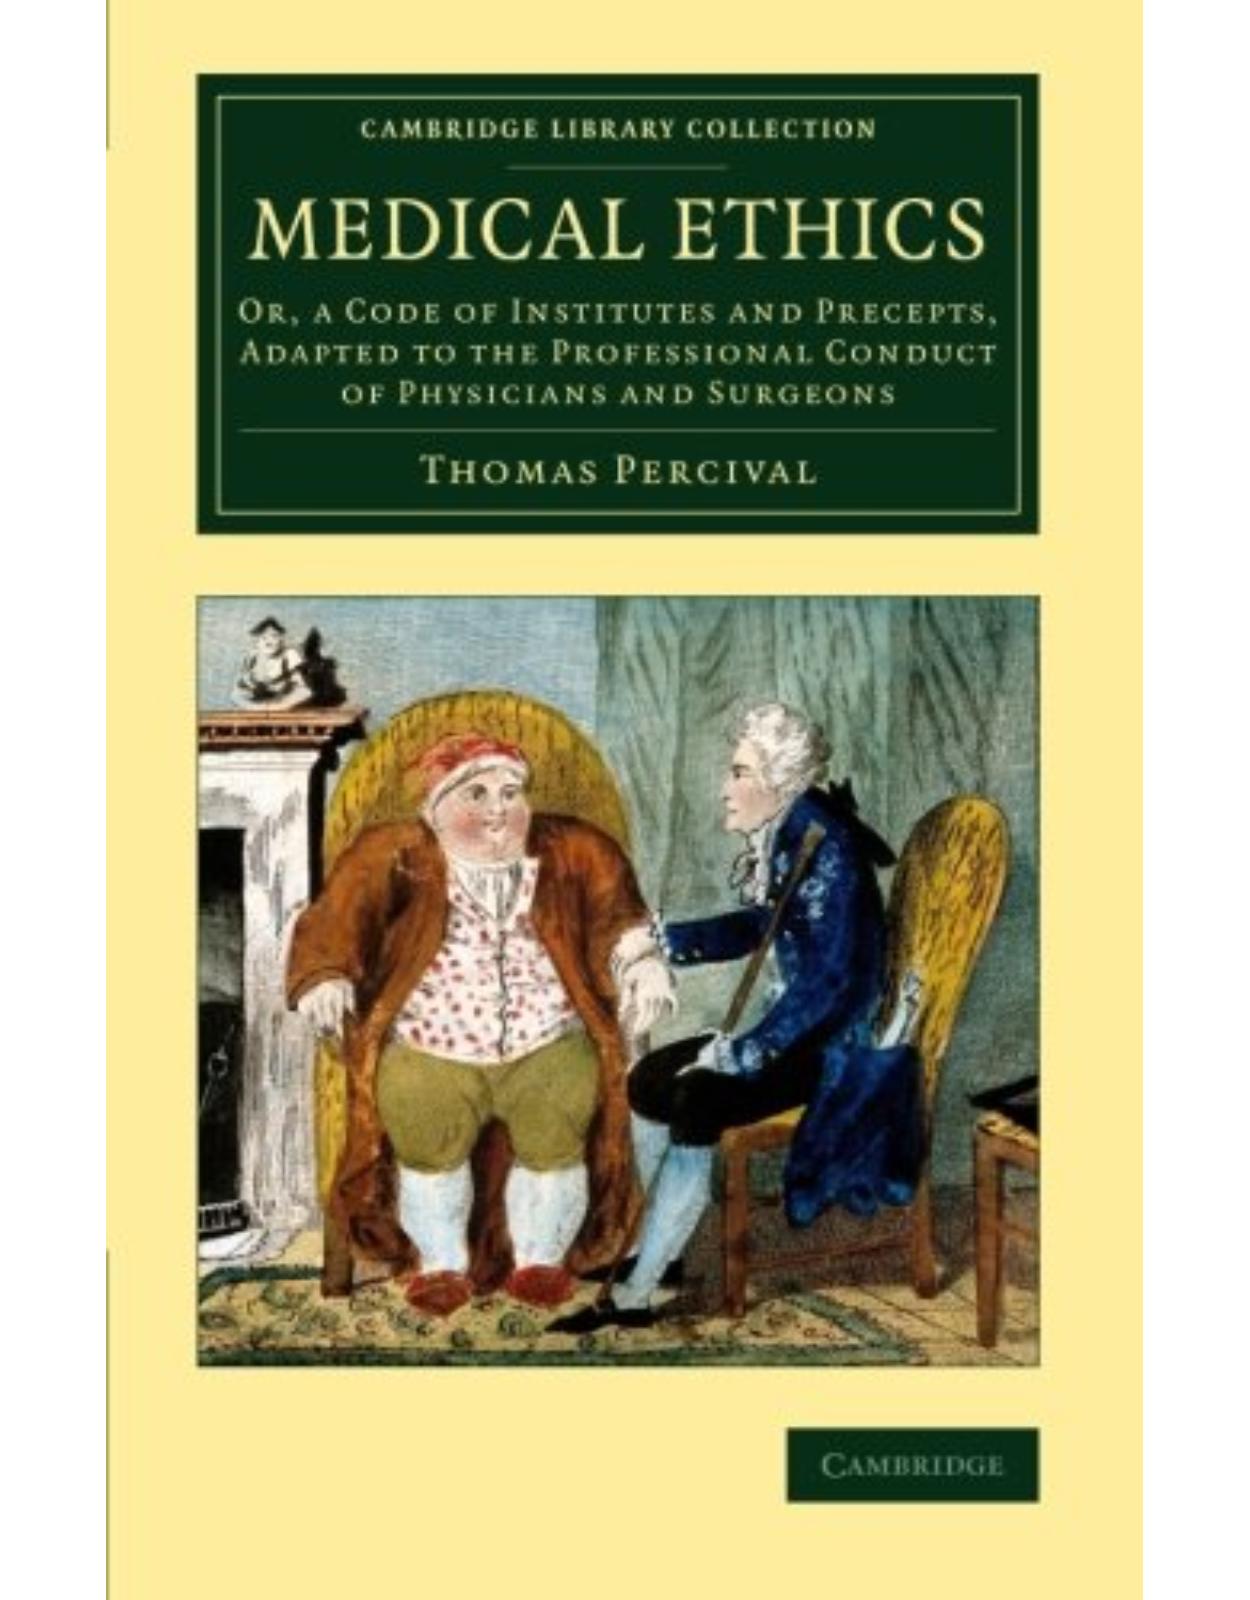 Medical Ethics: Or, a Code of Institutes and Precepts, Adapted to the Professional Conduct of Physicians and Surgeons (Cambridge Library Collection - History of Medicine)